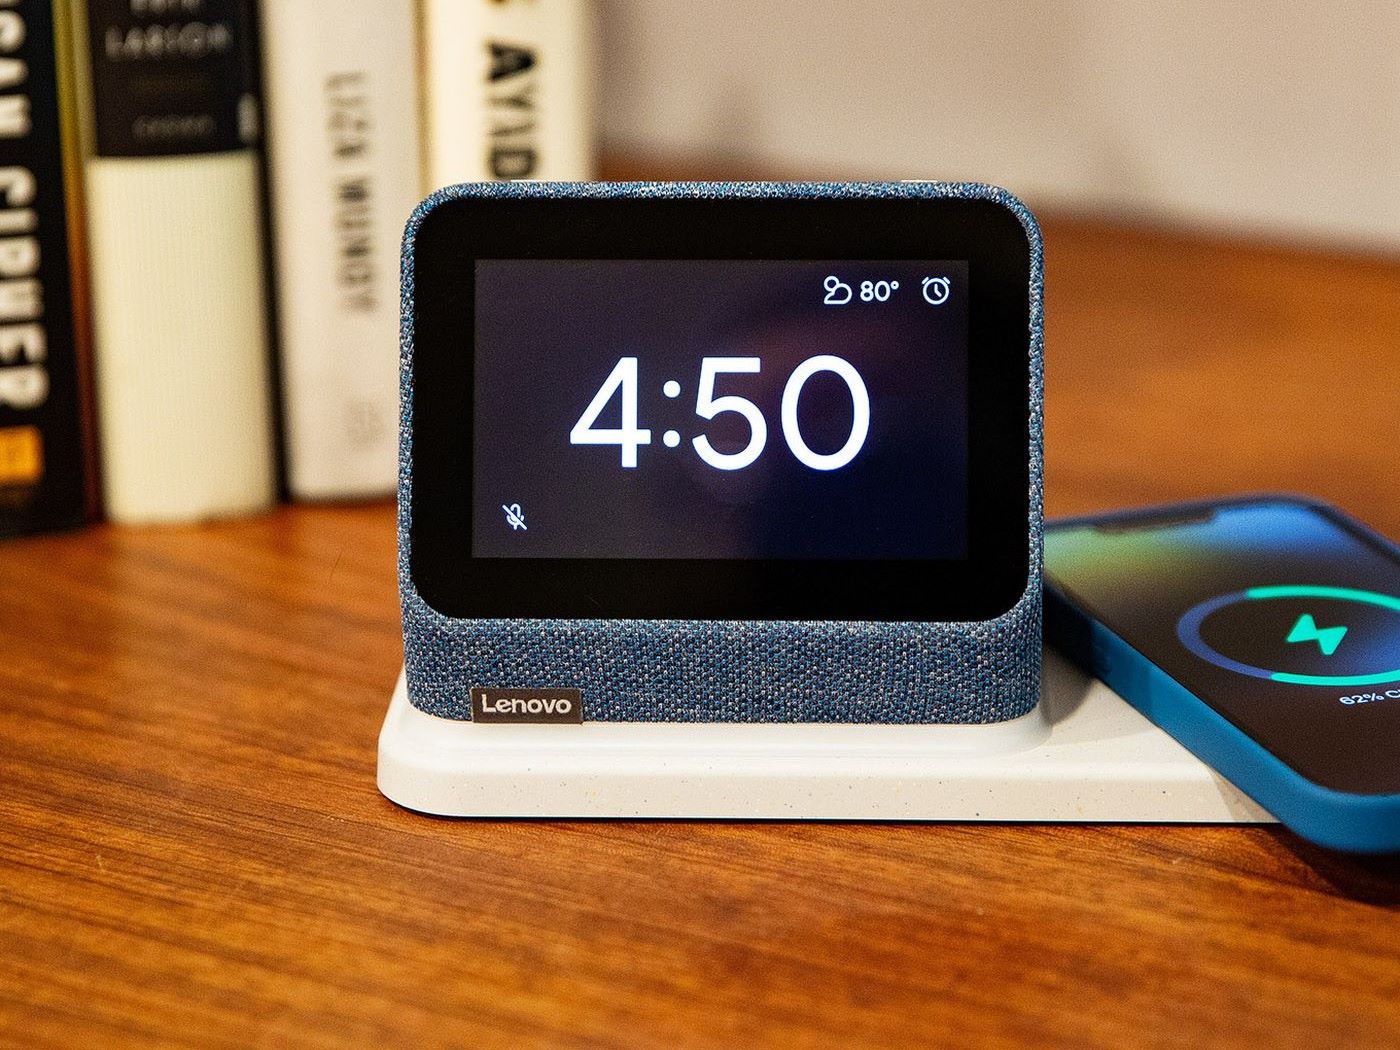 How To Connect Lenovo Smart Clock To Wi-Fi